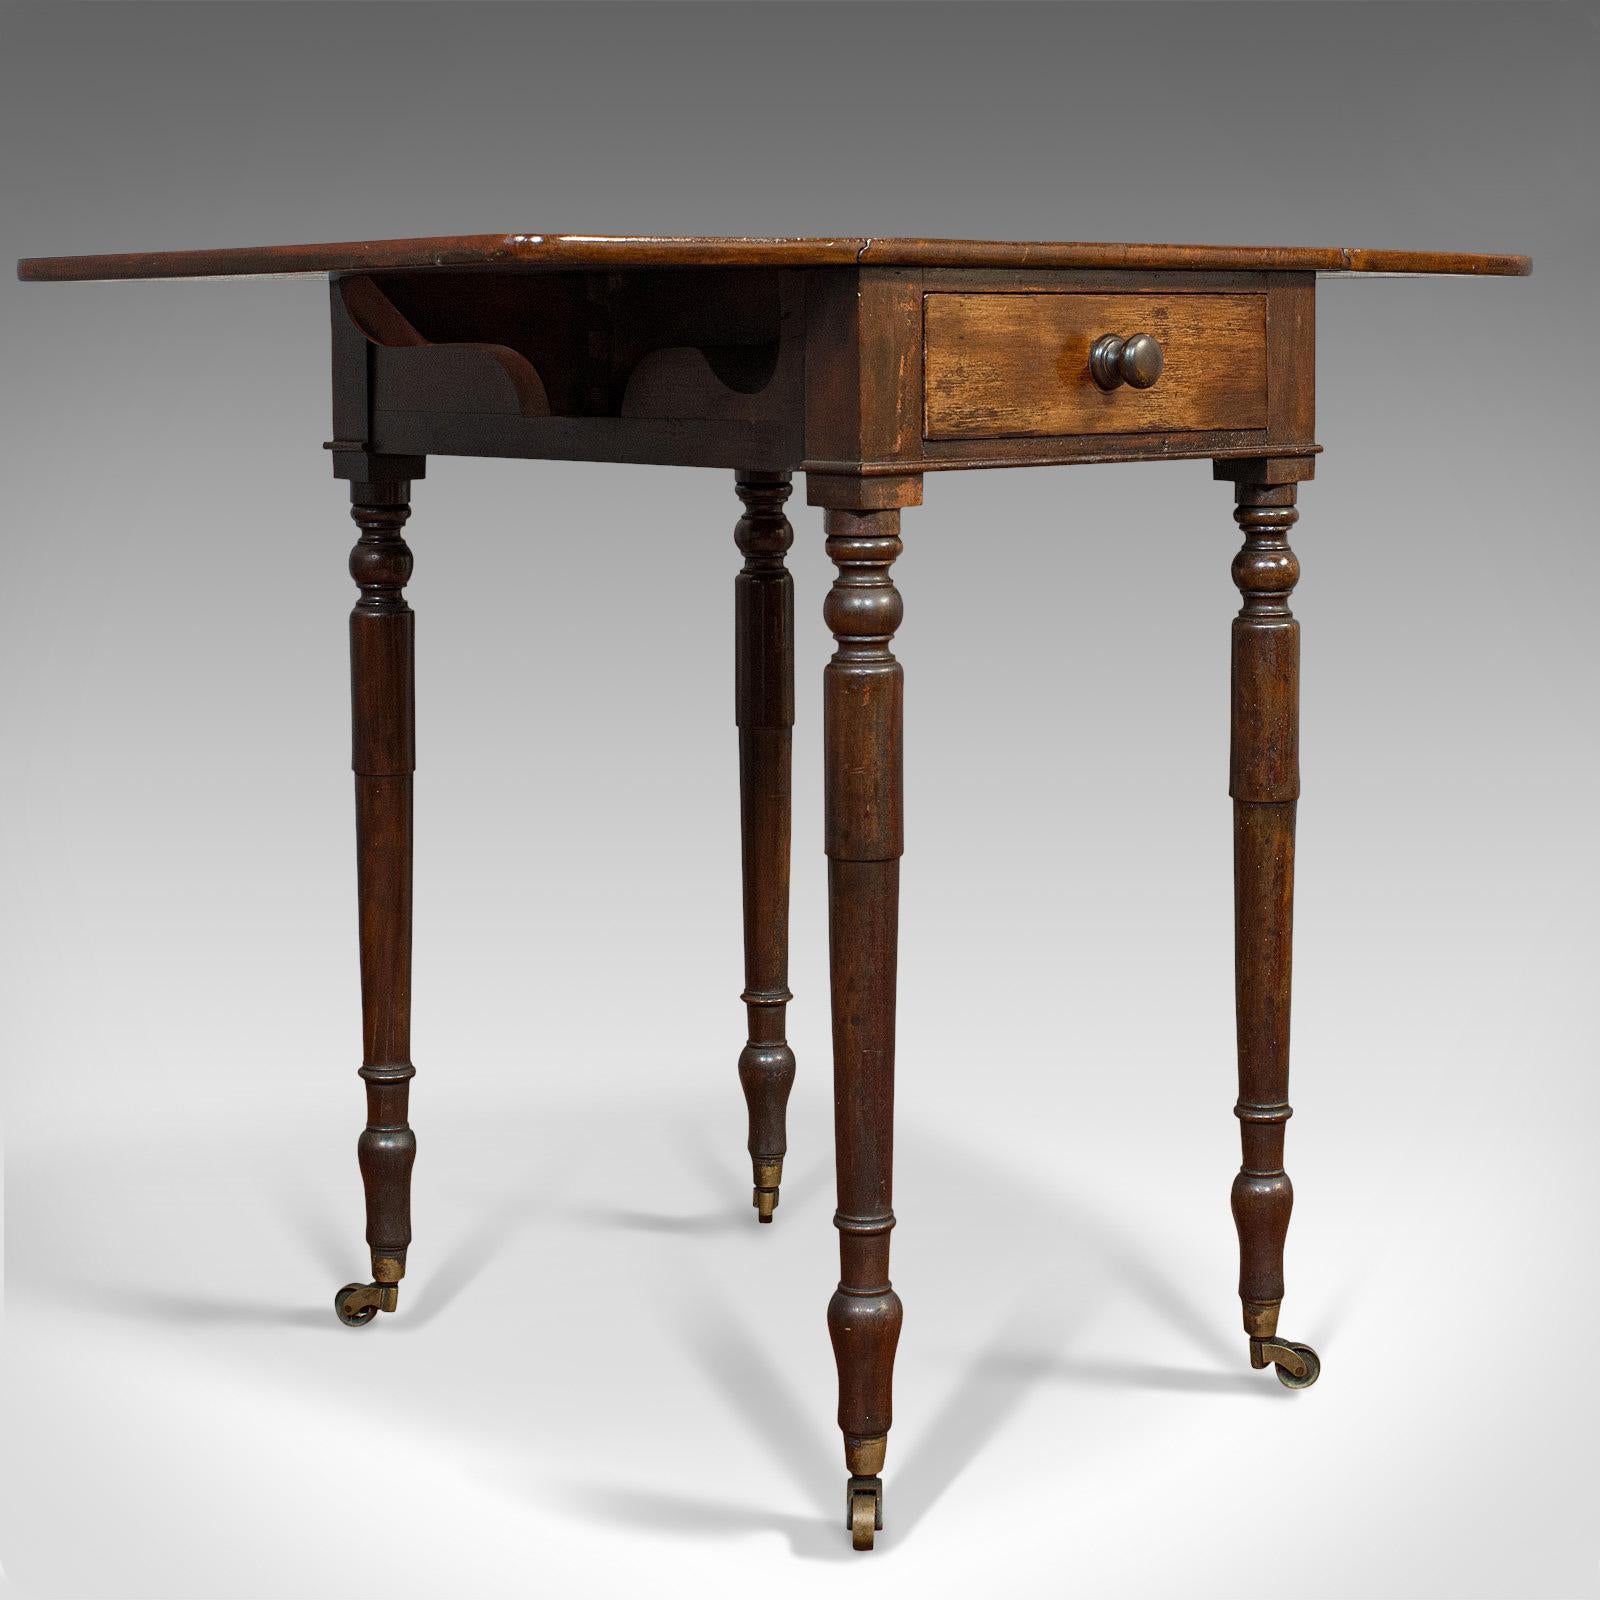 This is an antique Pembroke table. An English, mahogany drop-leaf occasional table, dating to the Regency period, circa 1820.

A delightful Regency piece
Displays a desirable aged patina
Rich mahogany resplendent in consistent, rich hues
Fine